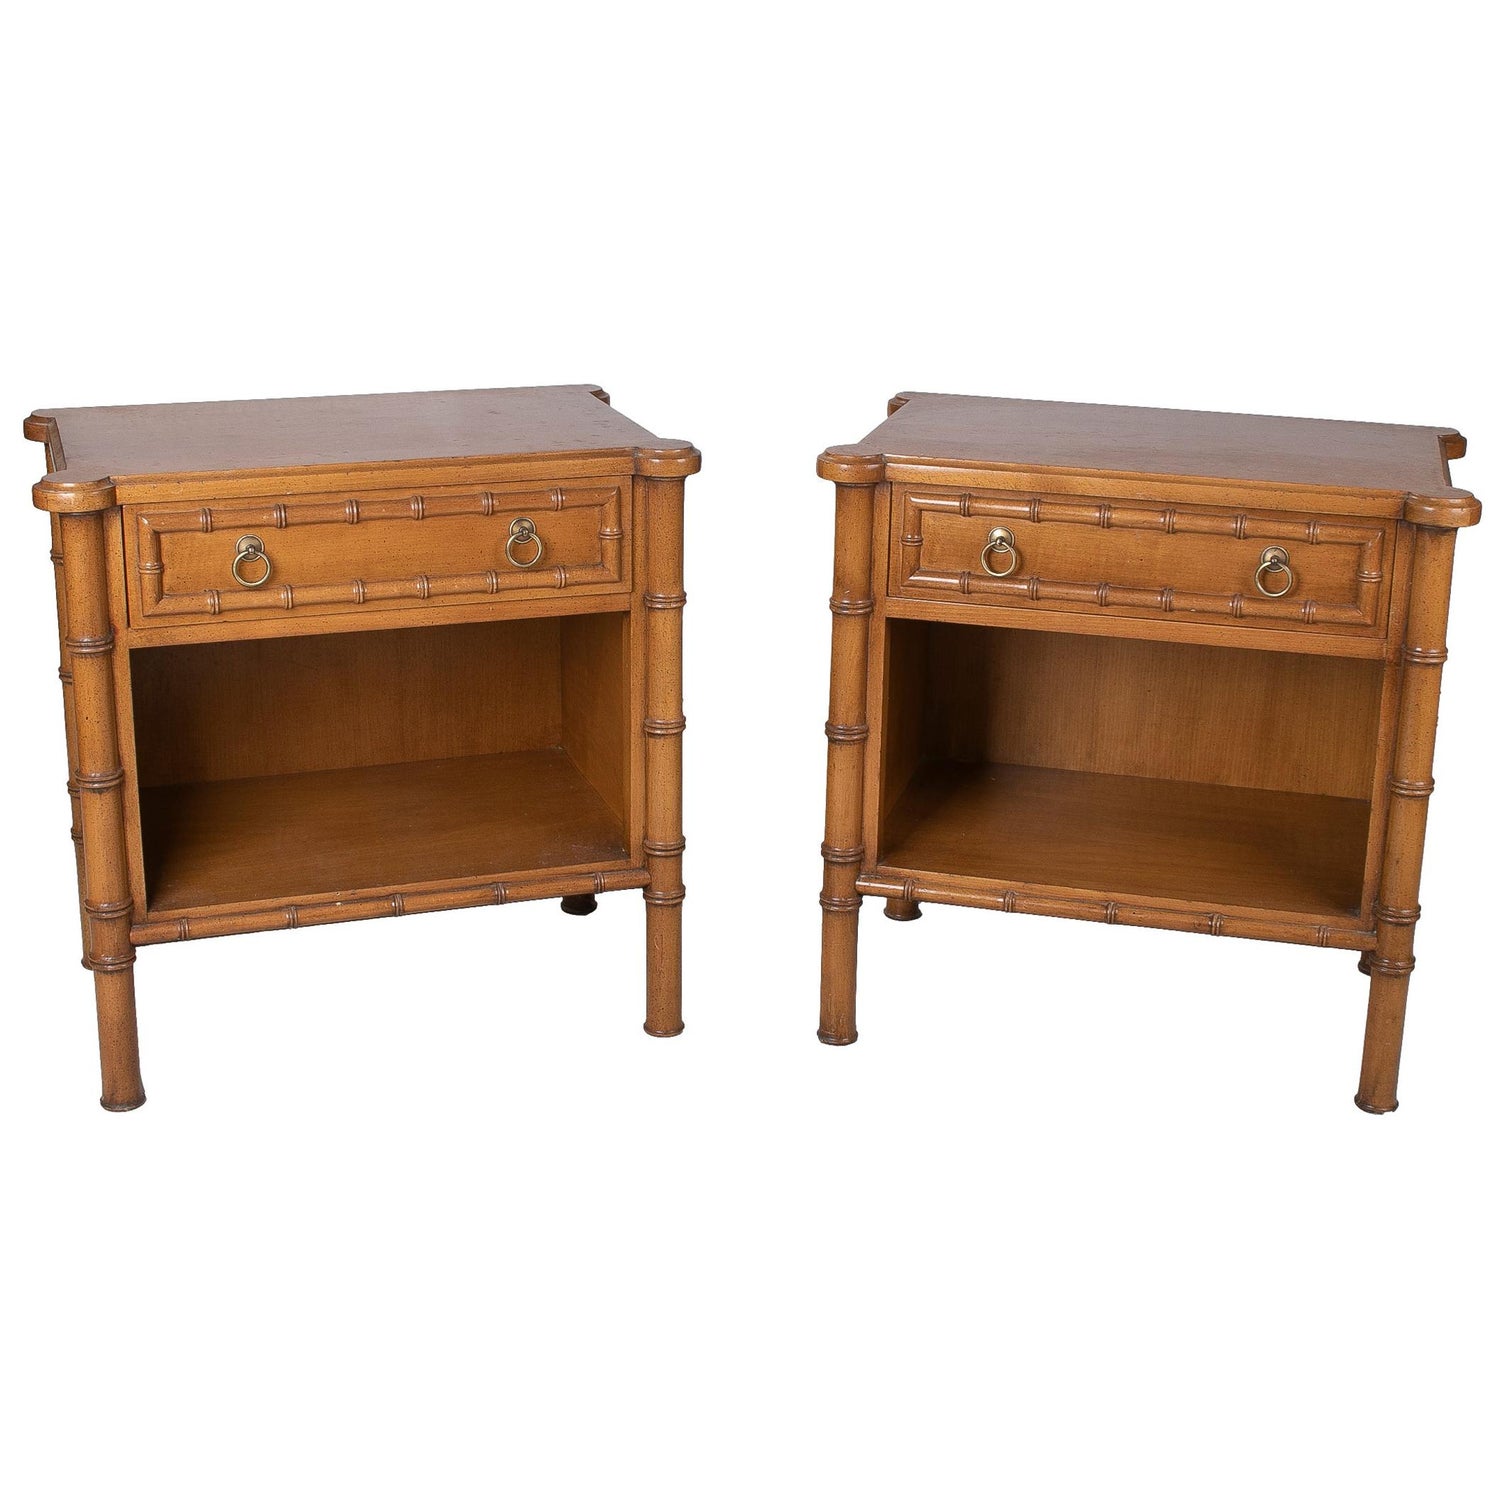 Delightful bamboo bedroom furniture Faux Bamboo Bedroom Furniture 15 For Sale At 1stdibs